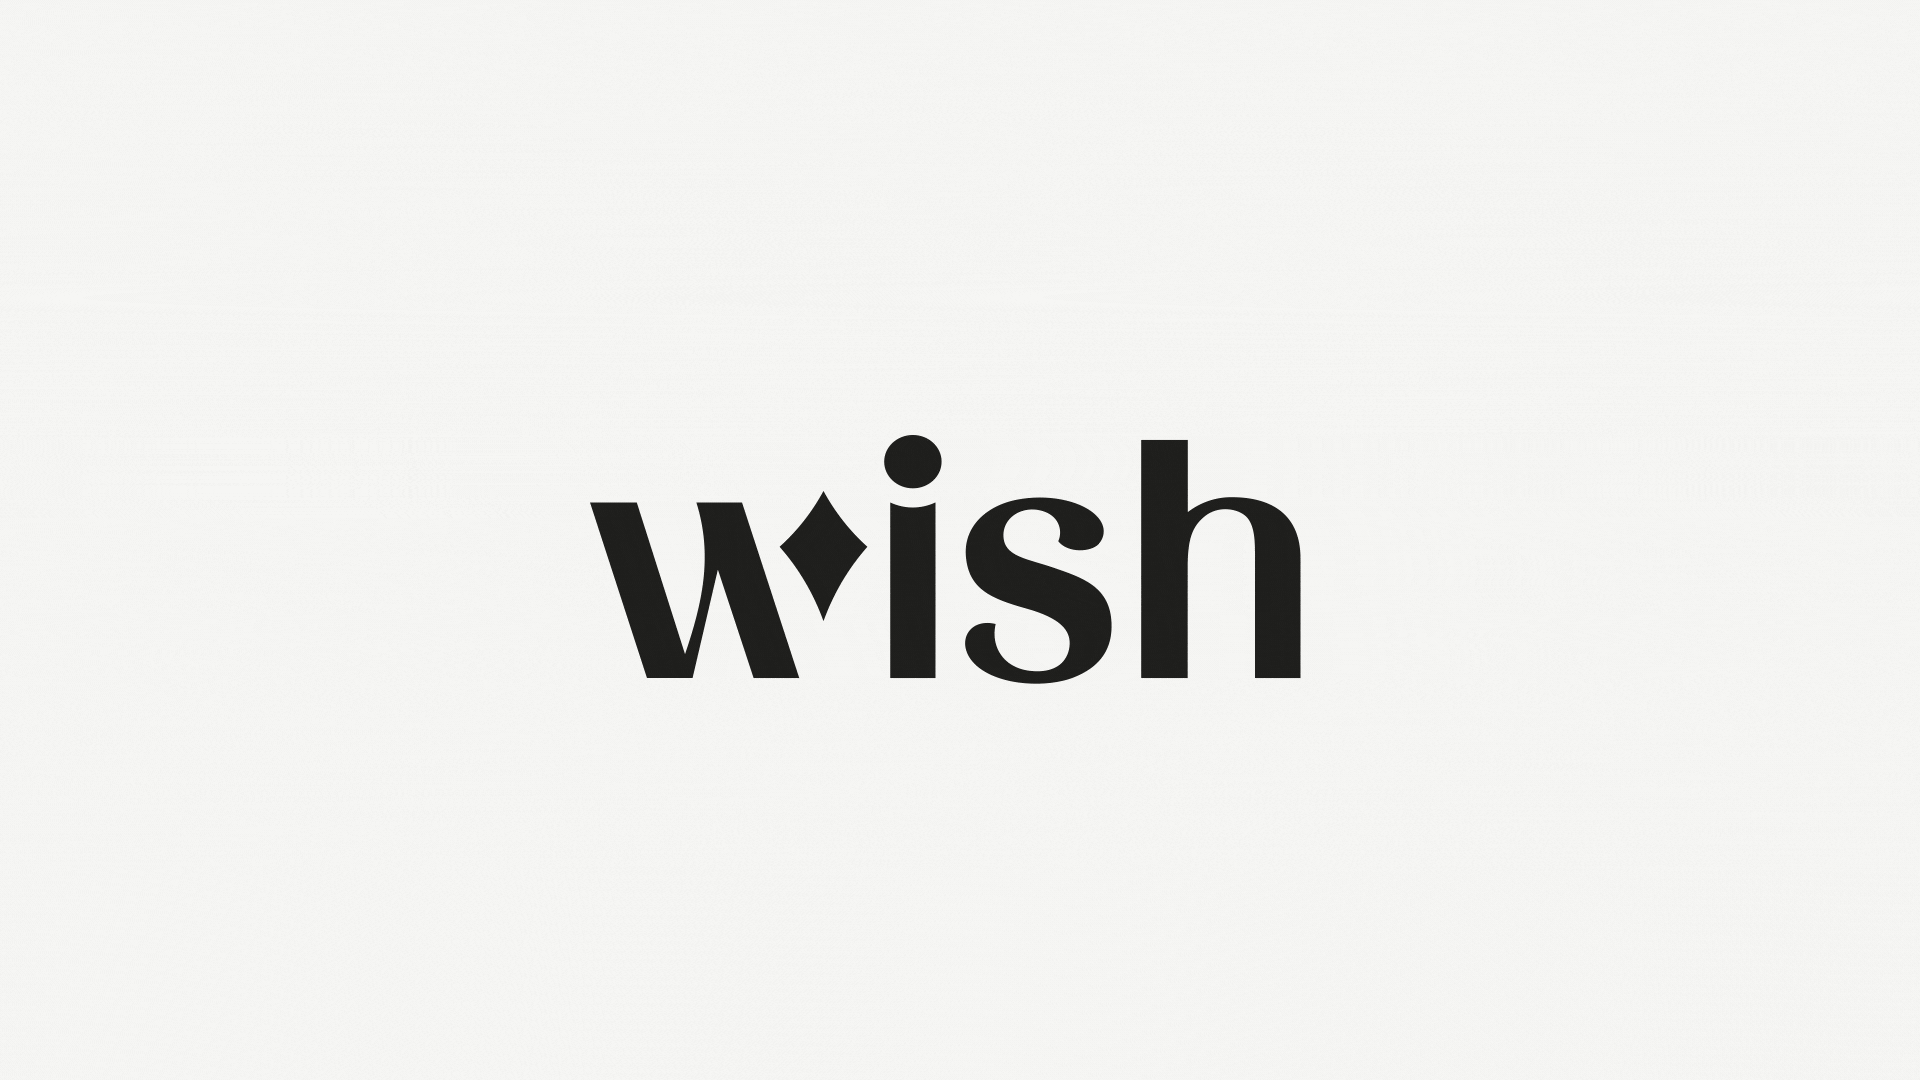 My WiSH Charity - Enhancing care for you, your family, for life.